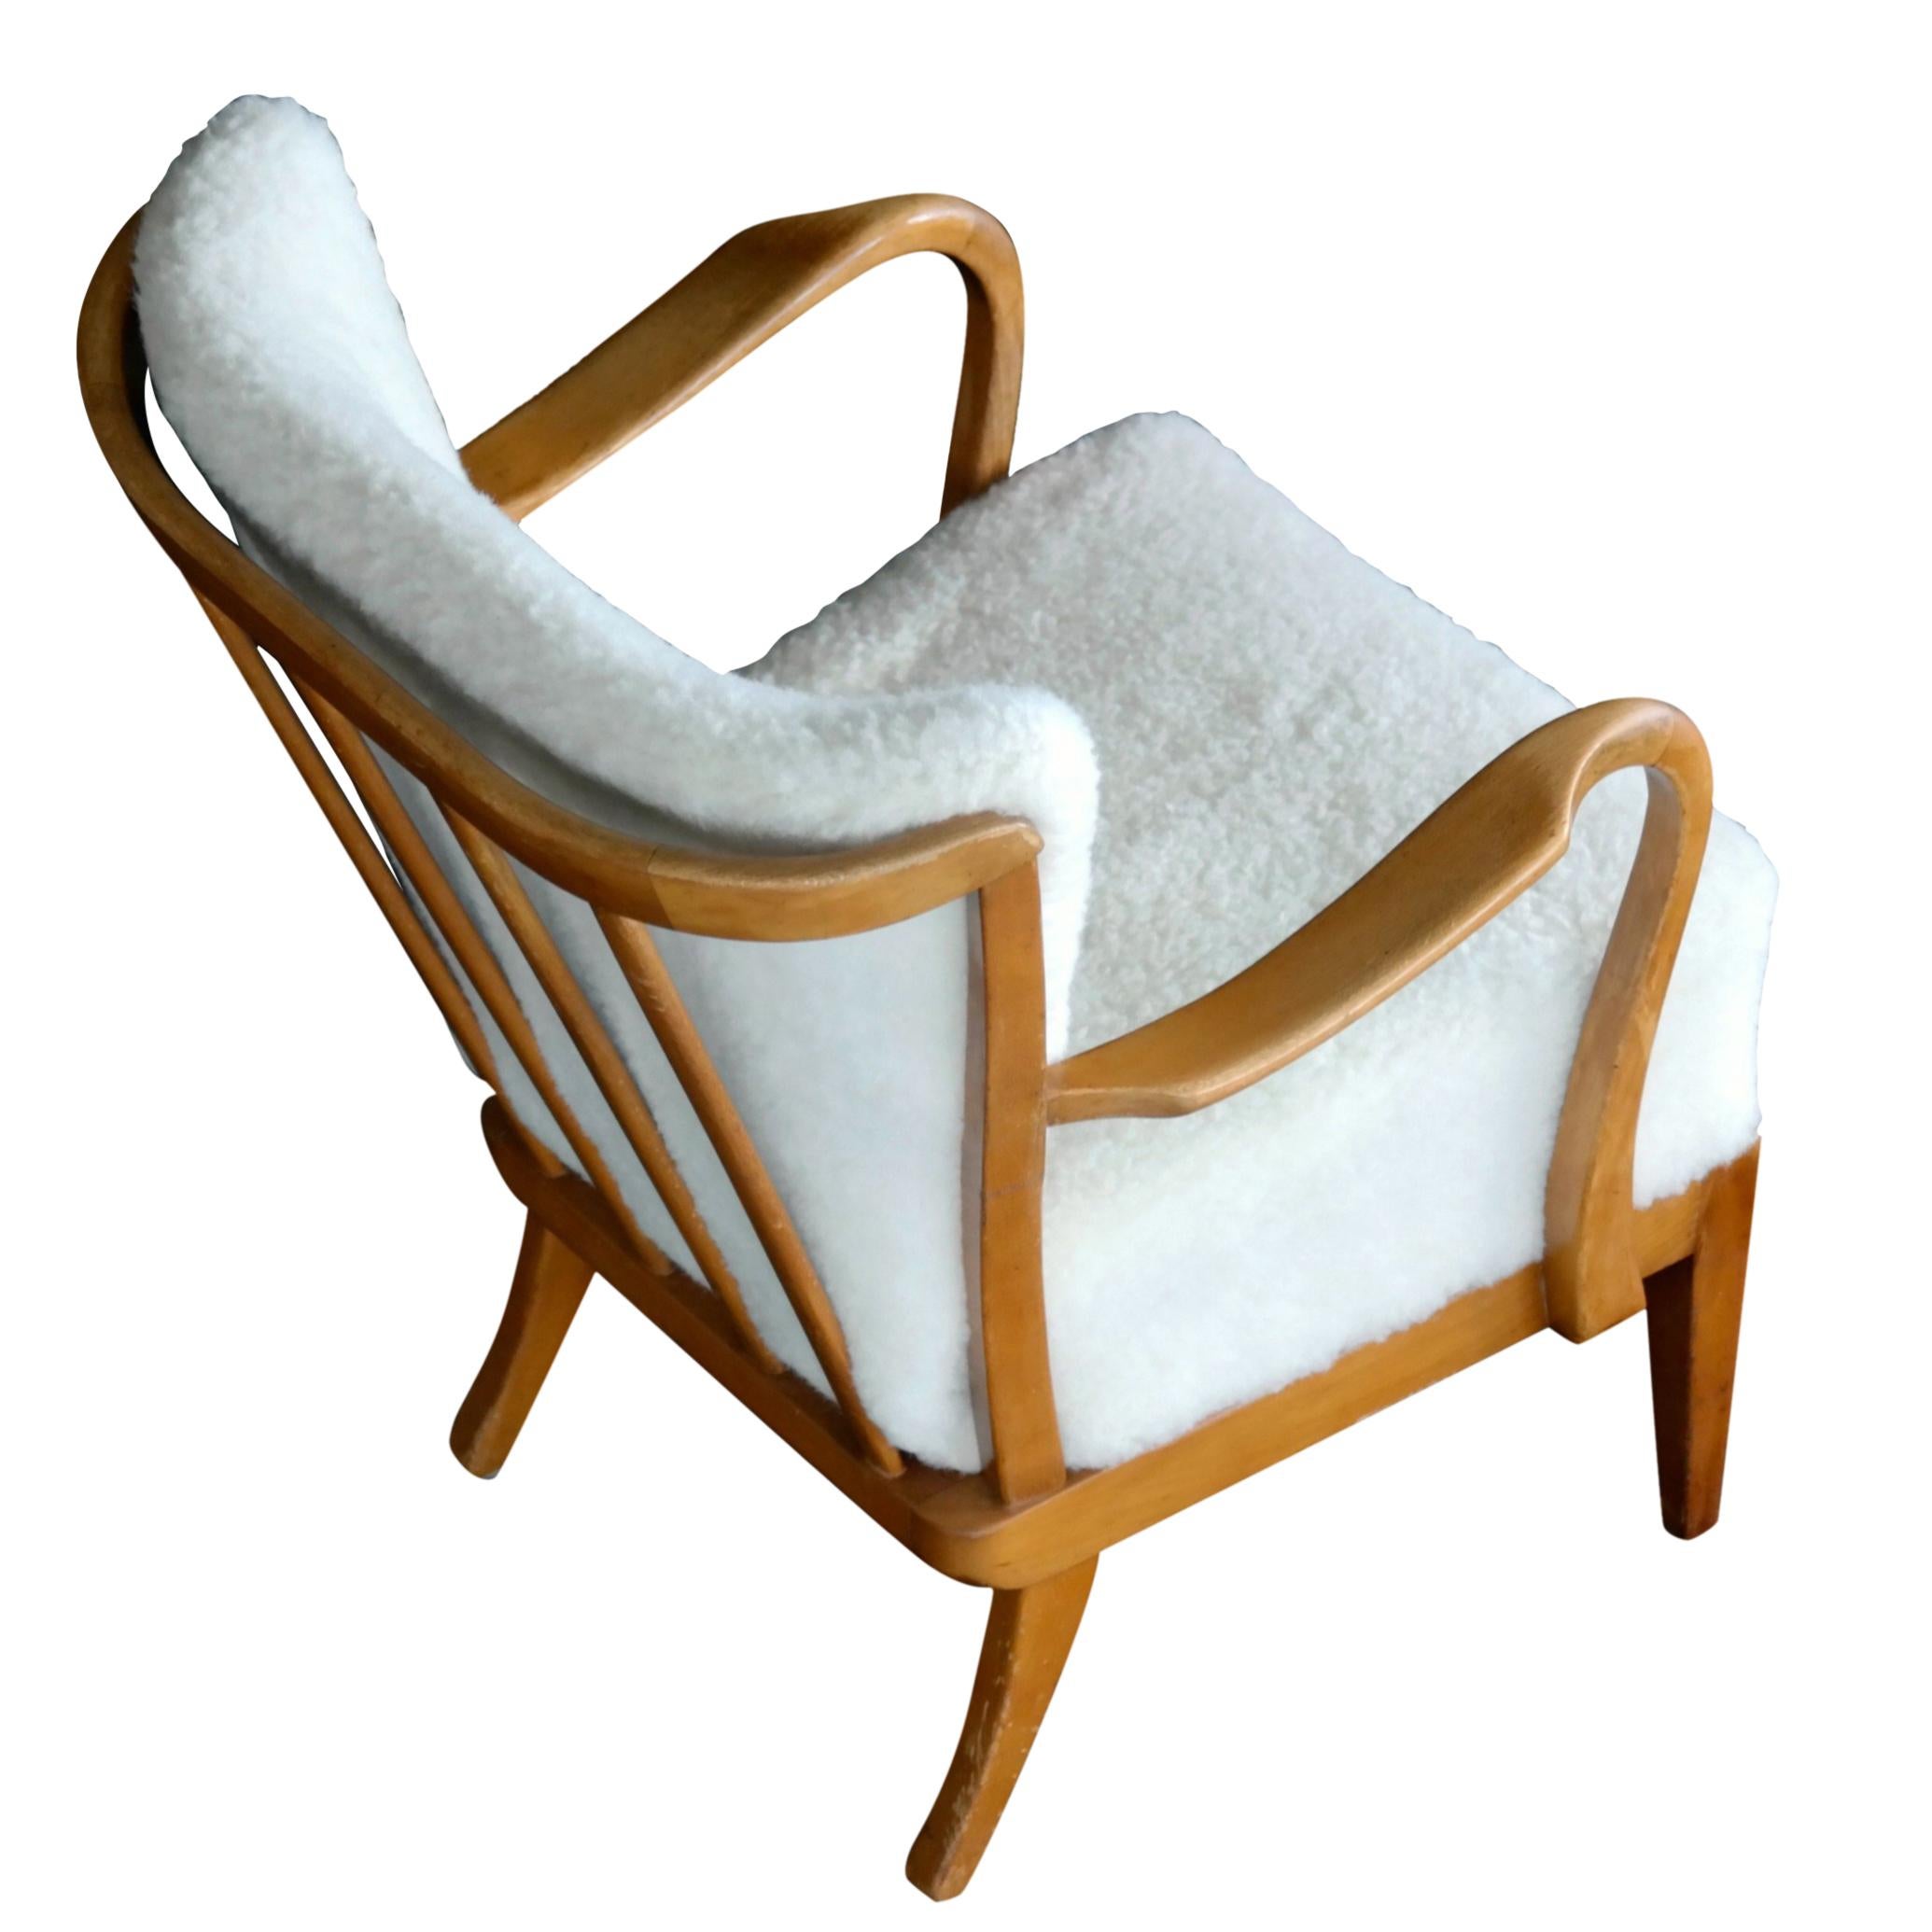 Alfred Christensen Danish Open-Arm Lounge Chair Covered in Lambswool, 1940s